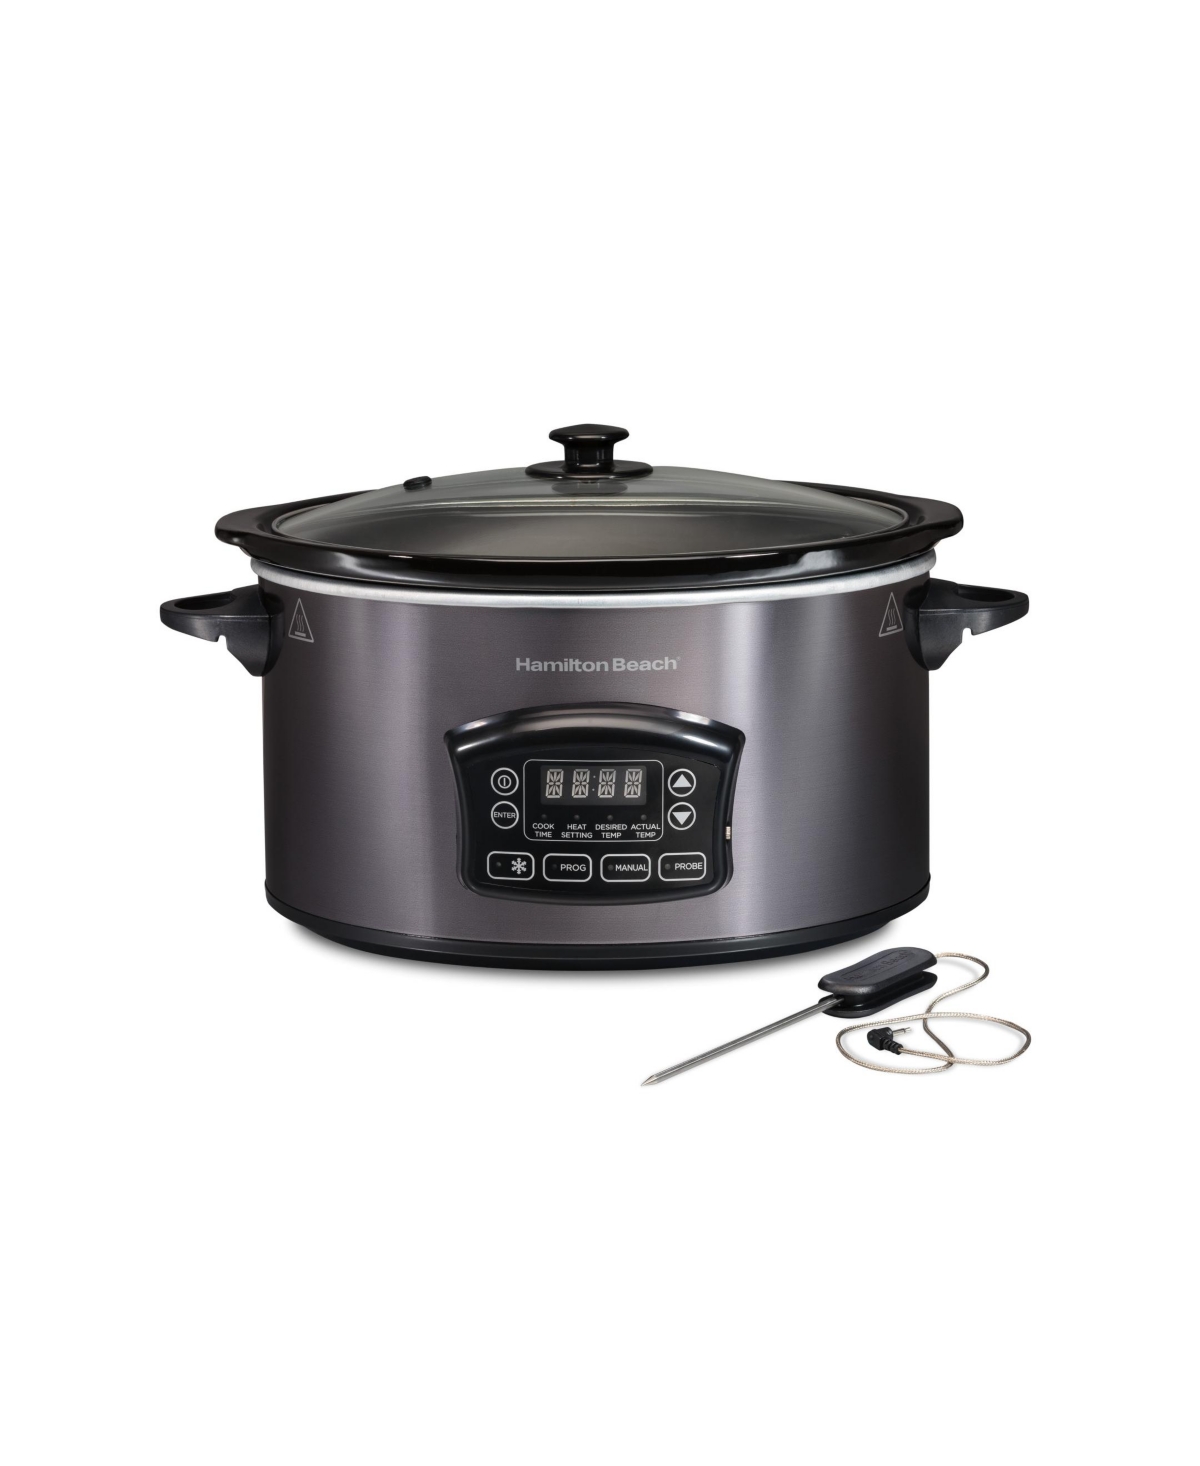 Hamilton Beach Programmable Defrost Slow Cooker In Stainless Steel